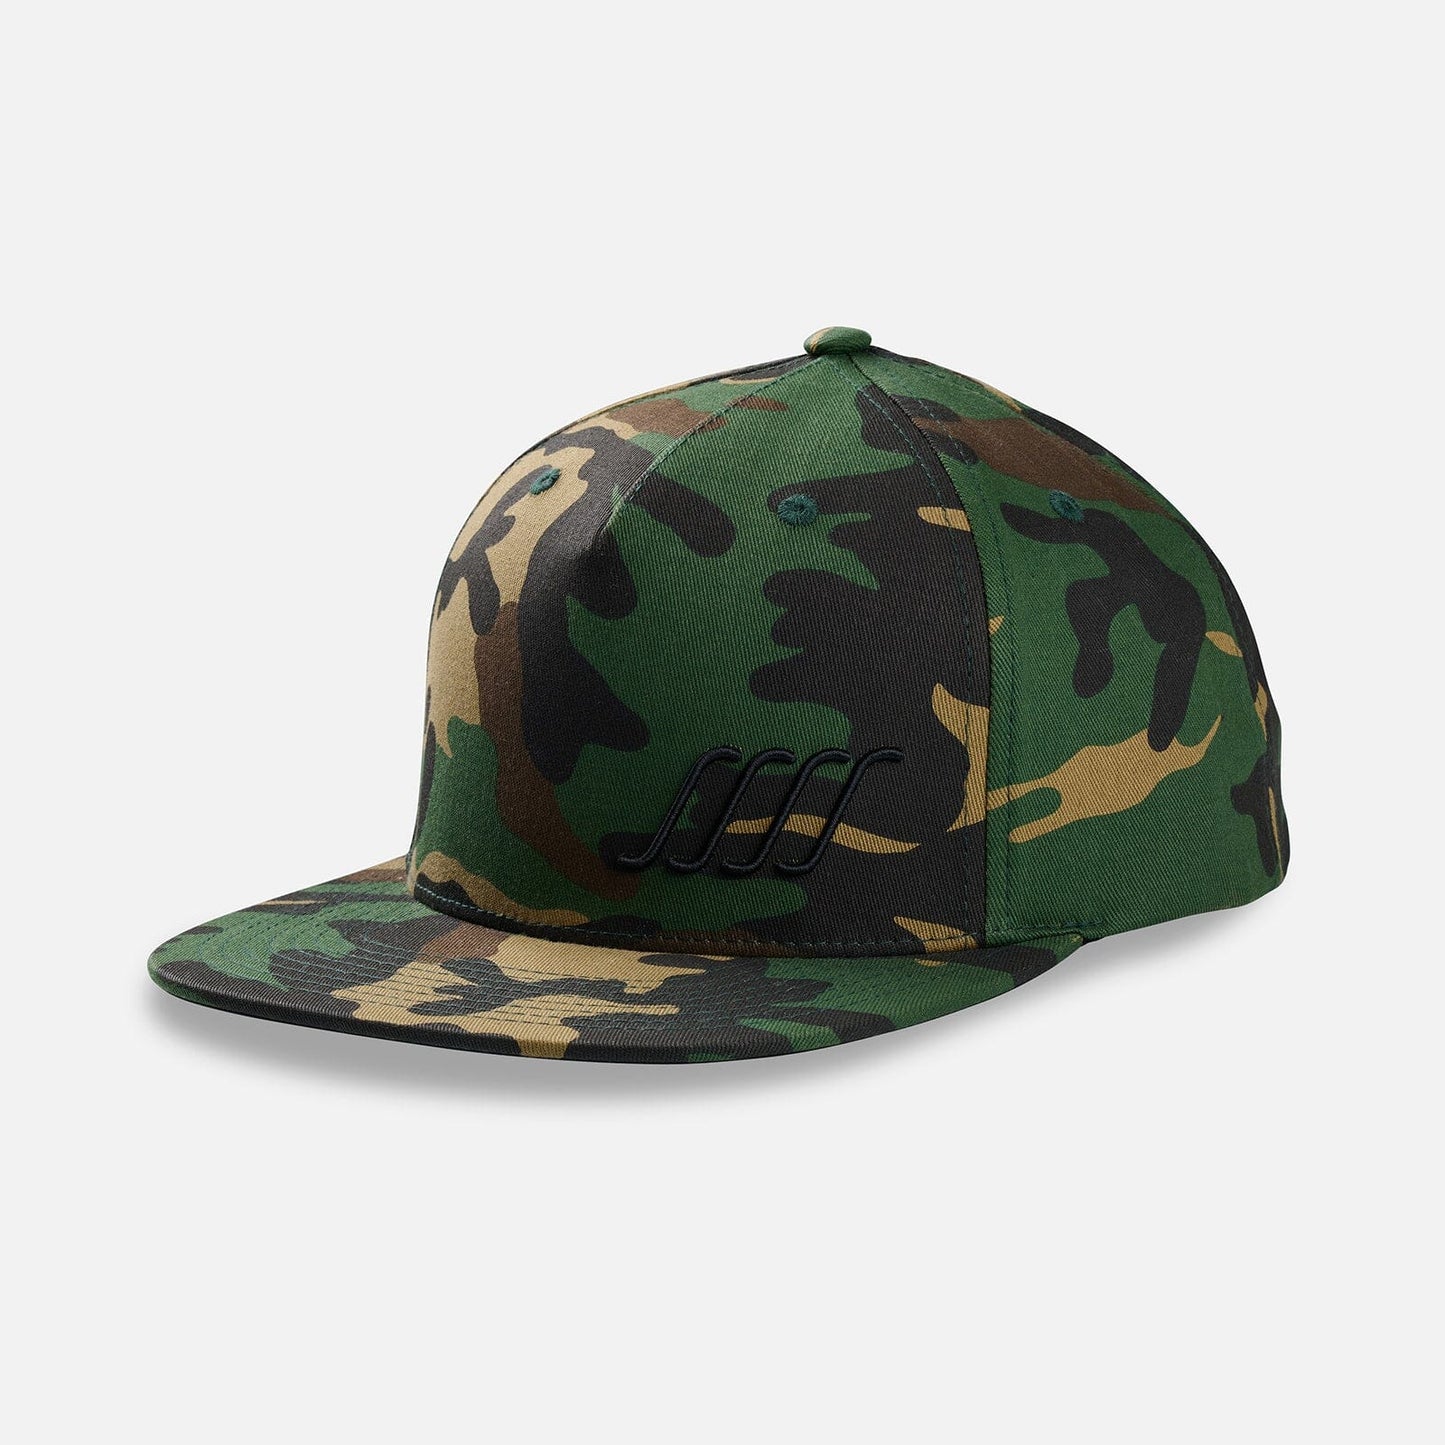 South Swell SSSS Embroidered Flat Bill Hat Hats SOUTH SWELL Camo 